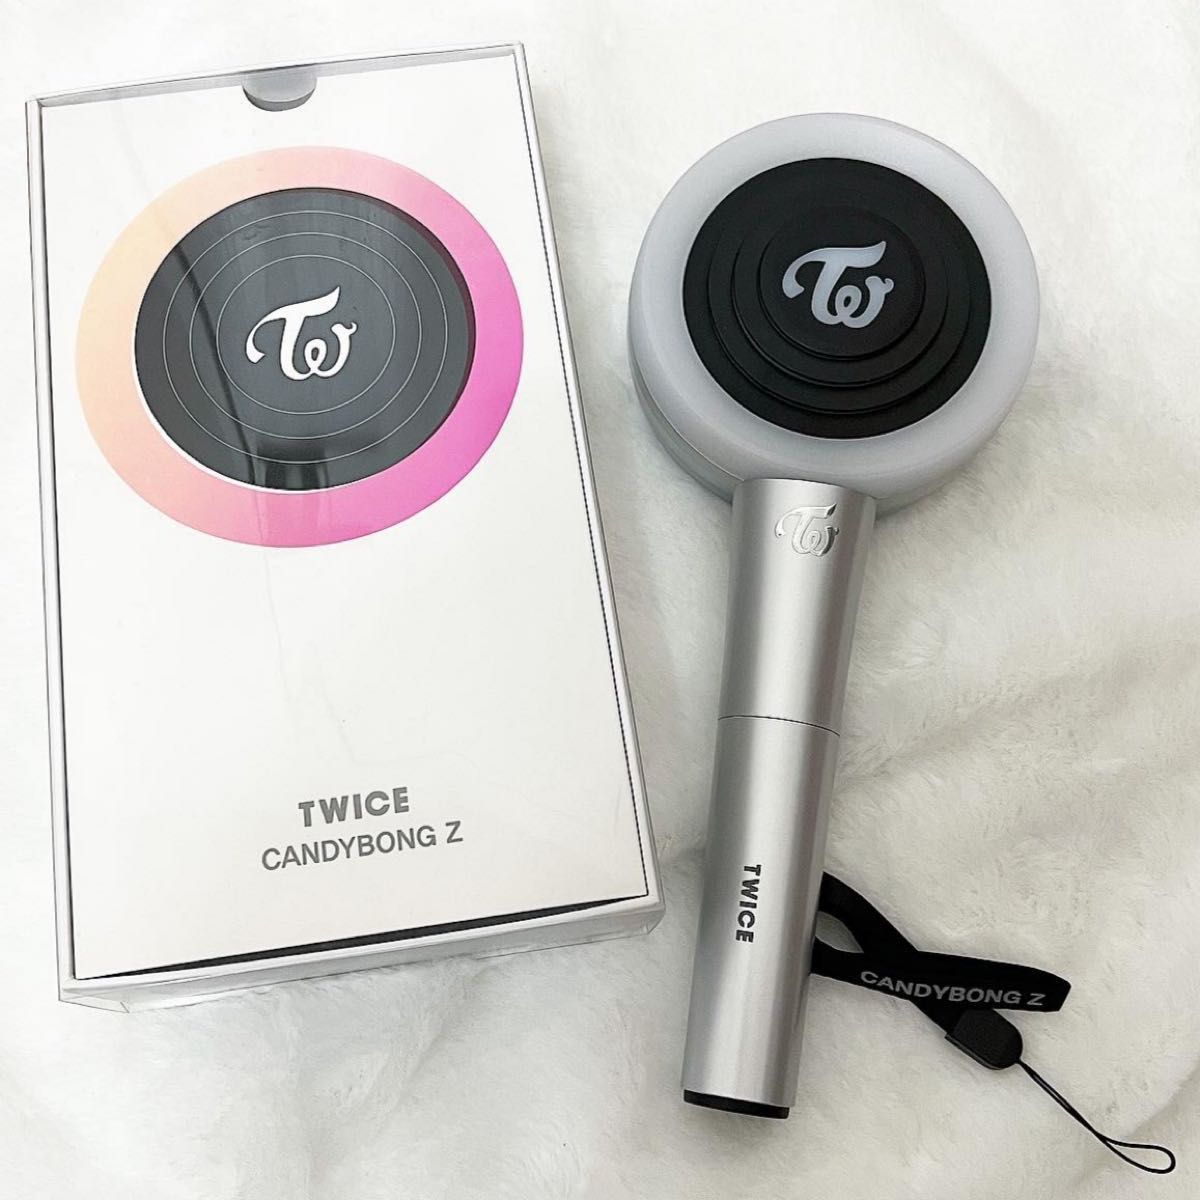 twice candybong z ペンライト ２個セット｜PayPayフリマ